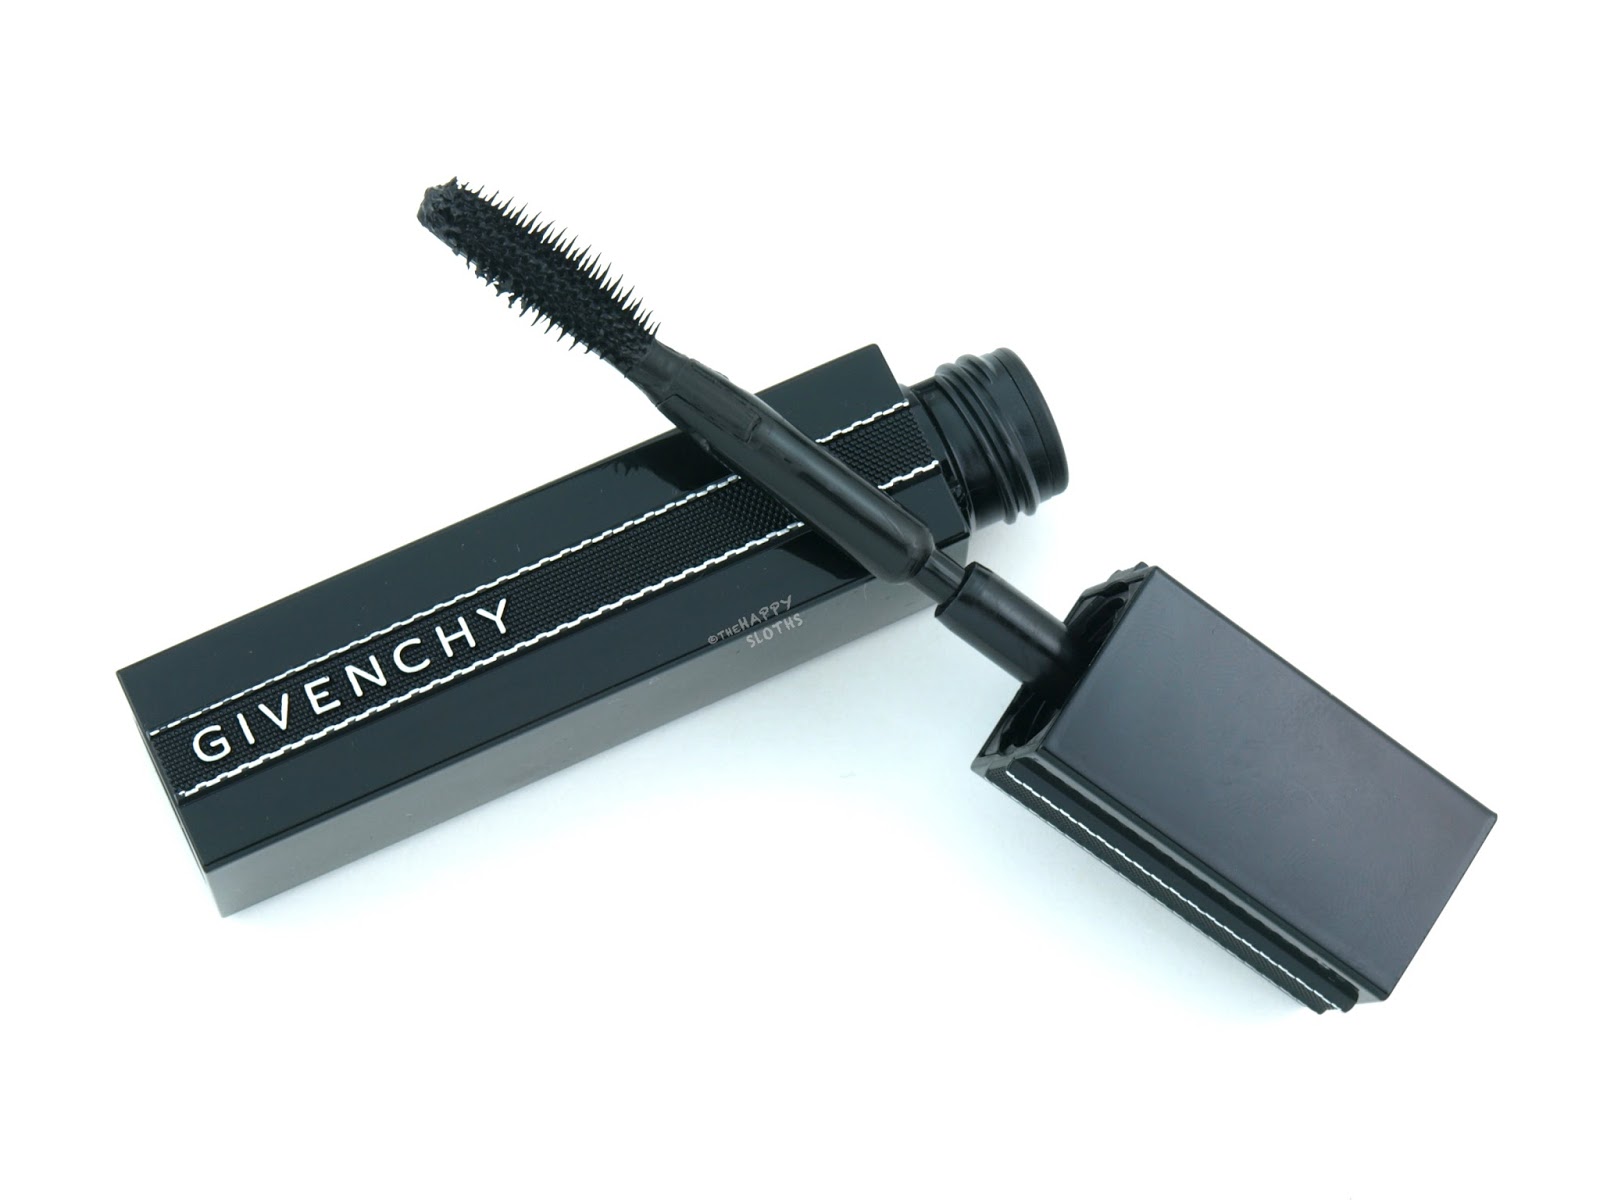 Givenchy Noir Interdit Mascara: Review and Swatches